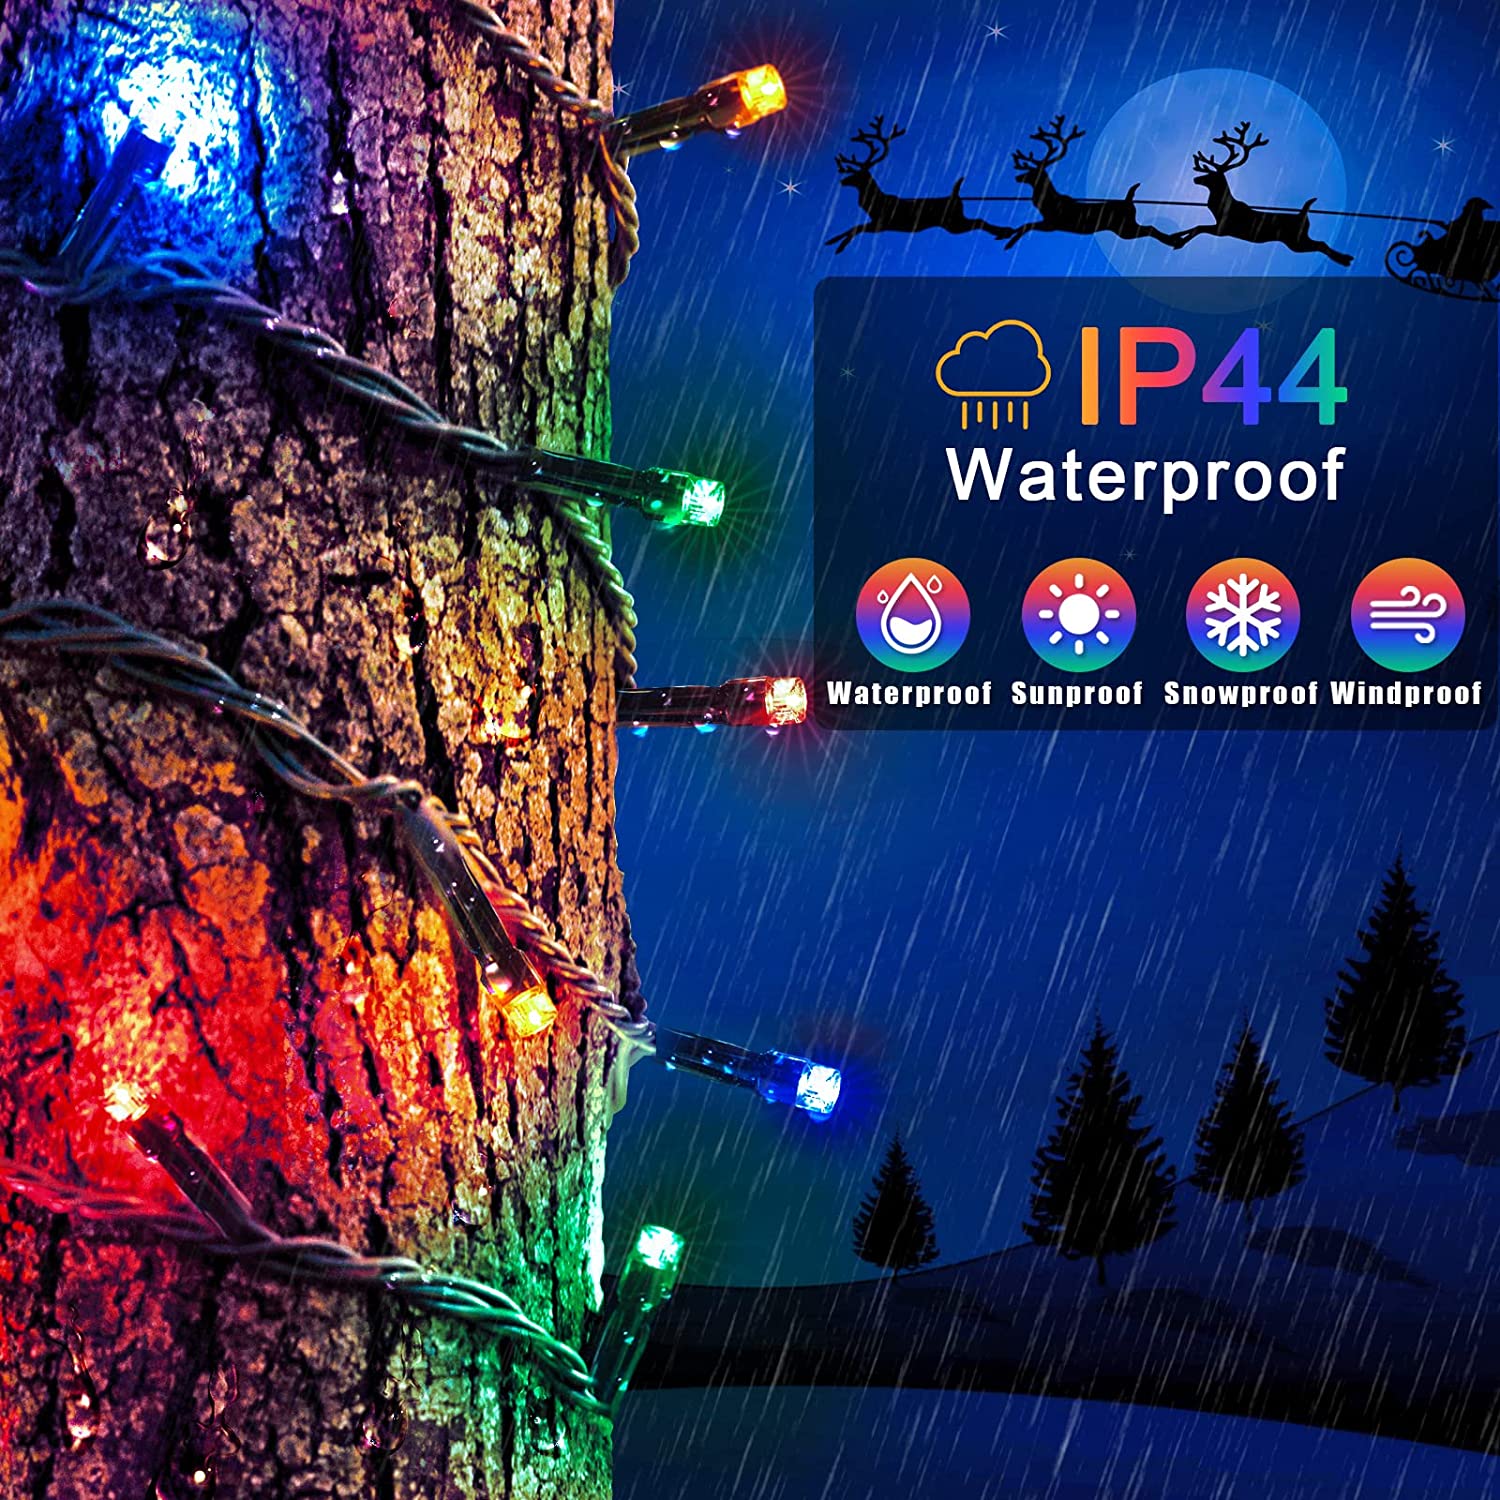 Rirool 100LED Solar Christmas Lights 39ft Waterproof Multicolor String Lights with 8 Modes for Gardens, Wedding, Party, Christmas Tree, Outdoor Xmas Decorations - image 5 of 9